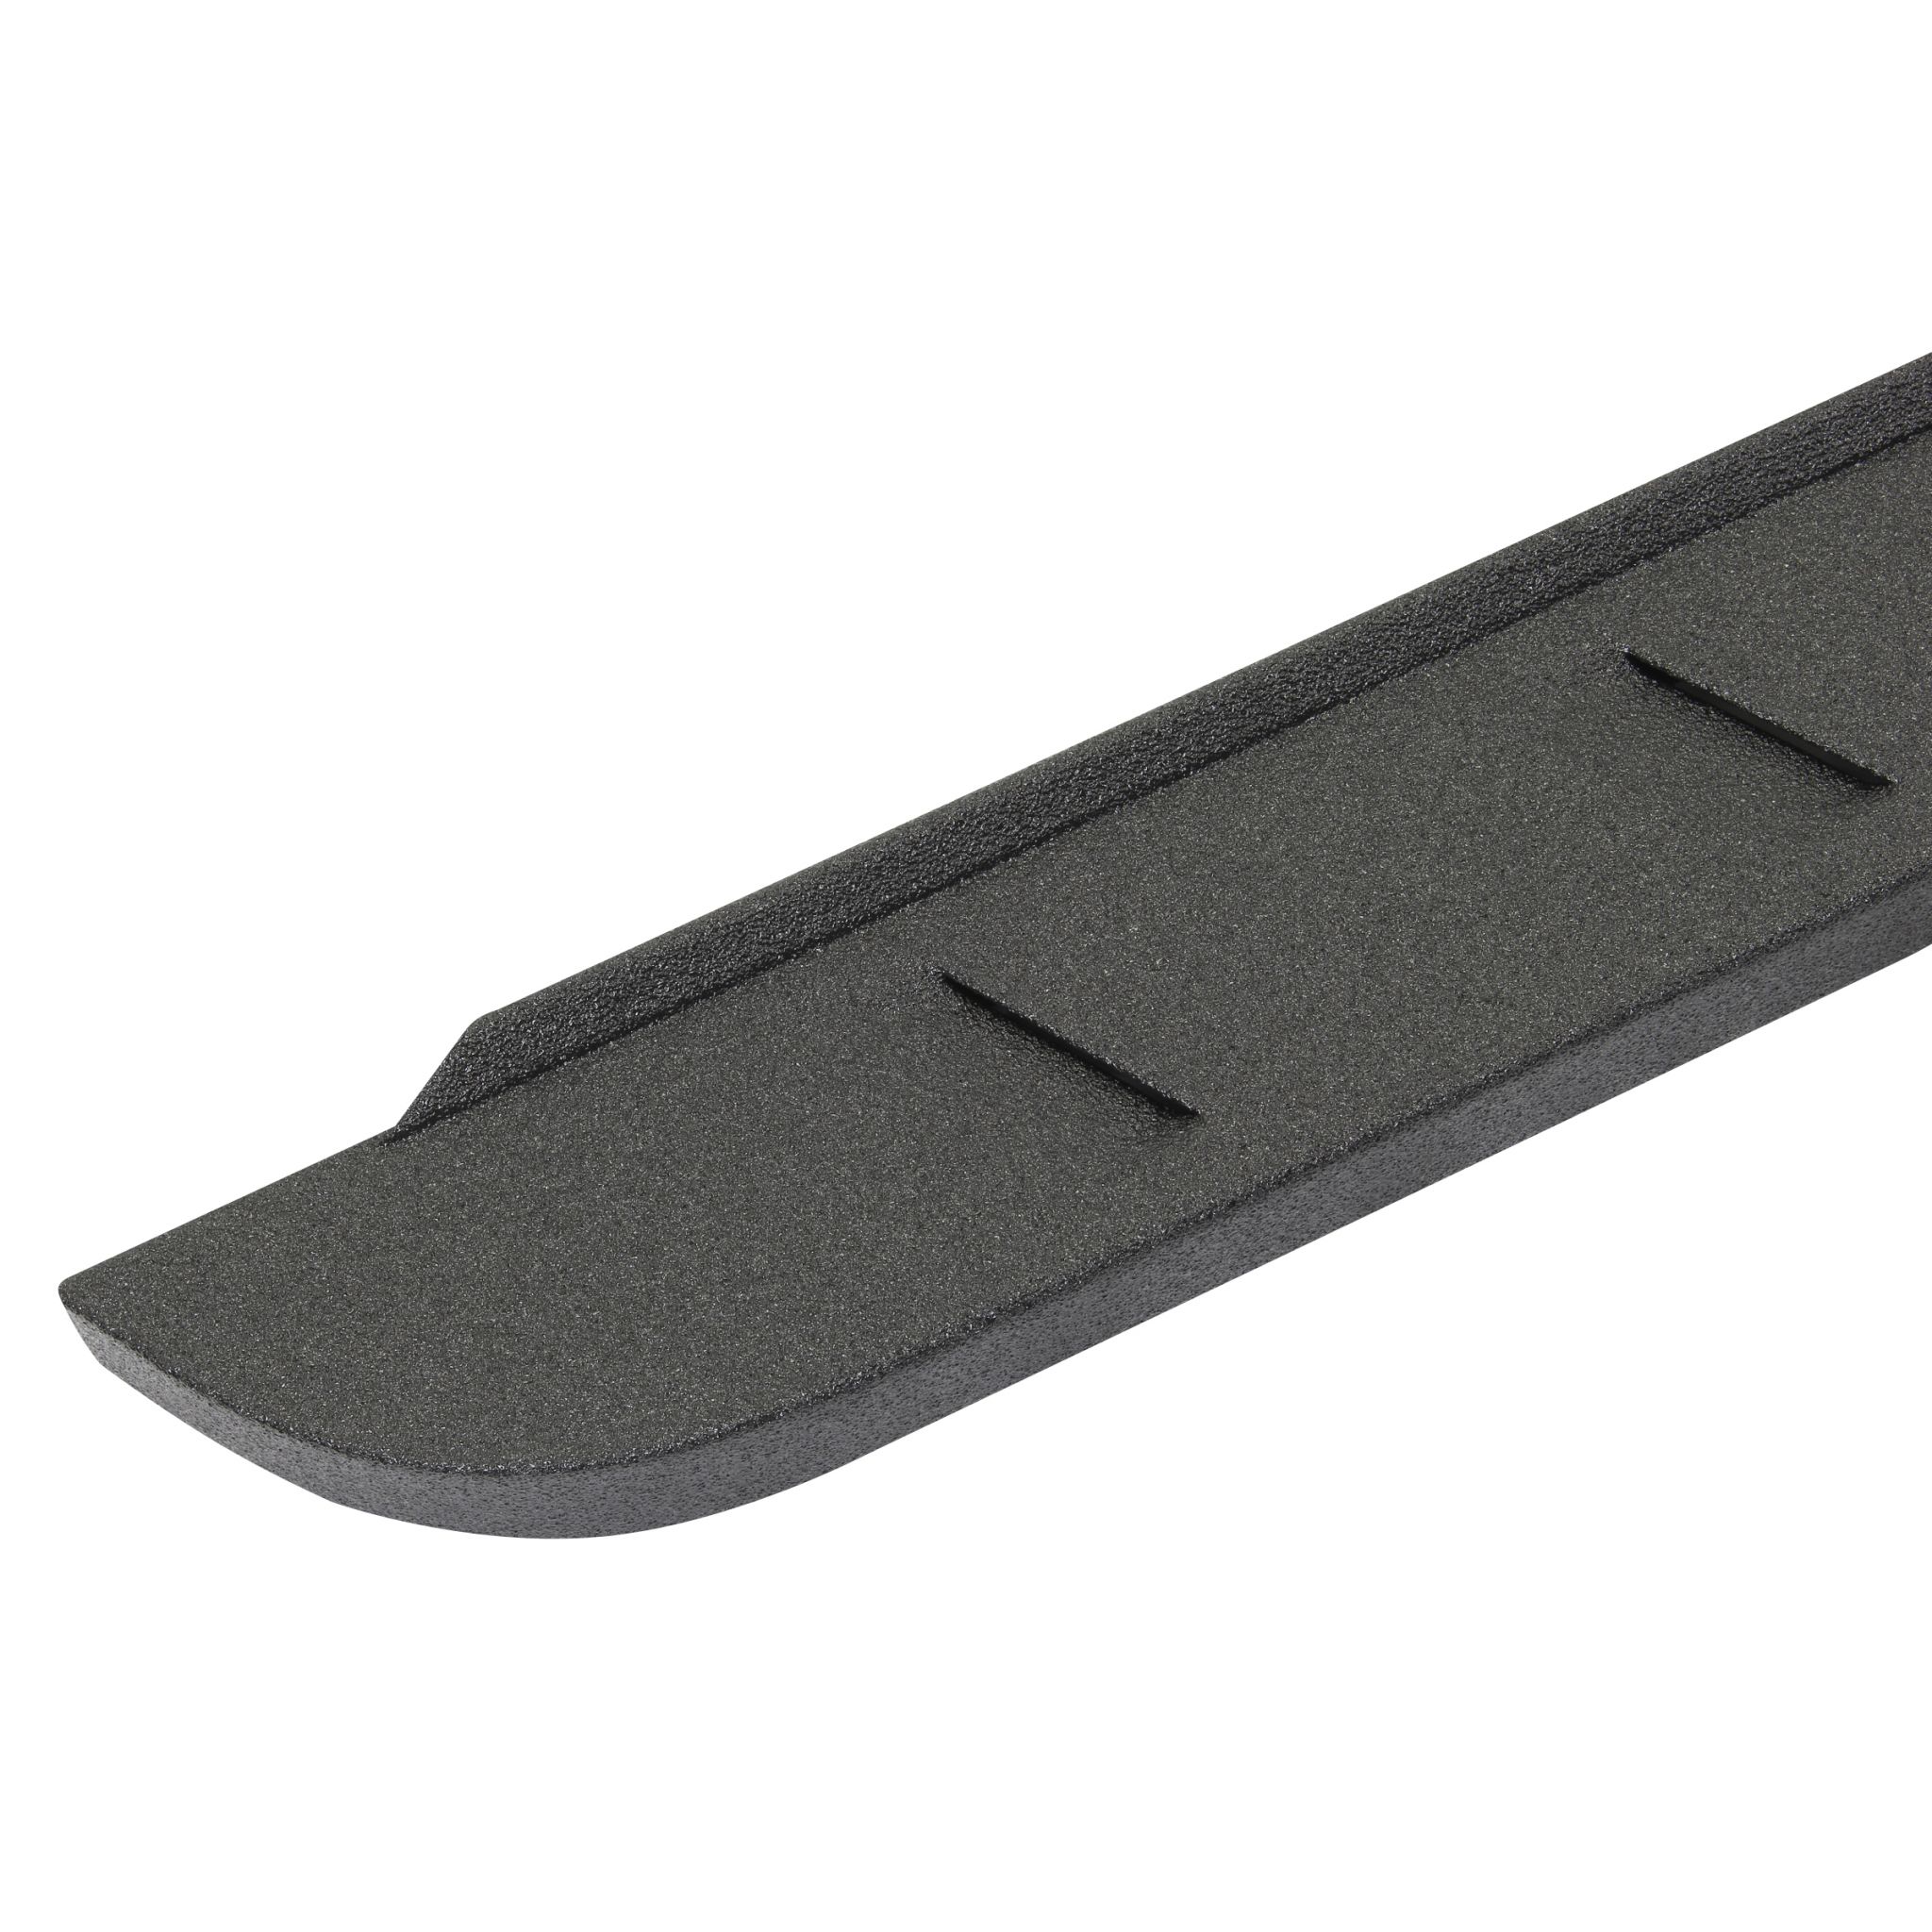 Go Rhino 63404887ST - RB10 Slim Line Running Boards With Mounting Brackets - Protective Bedliner Coating